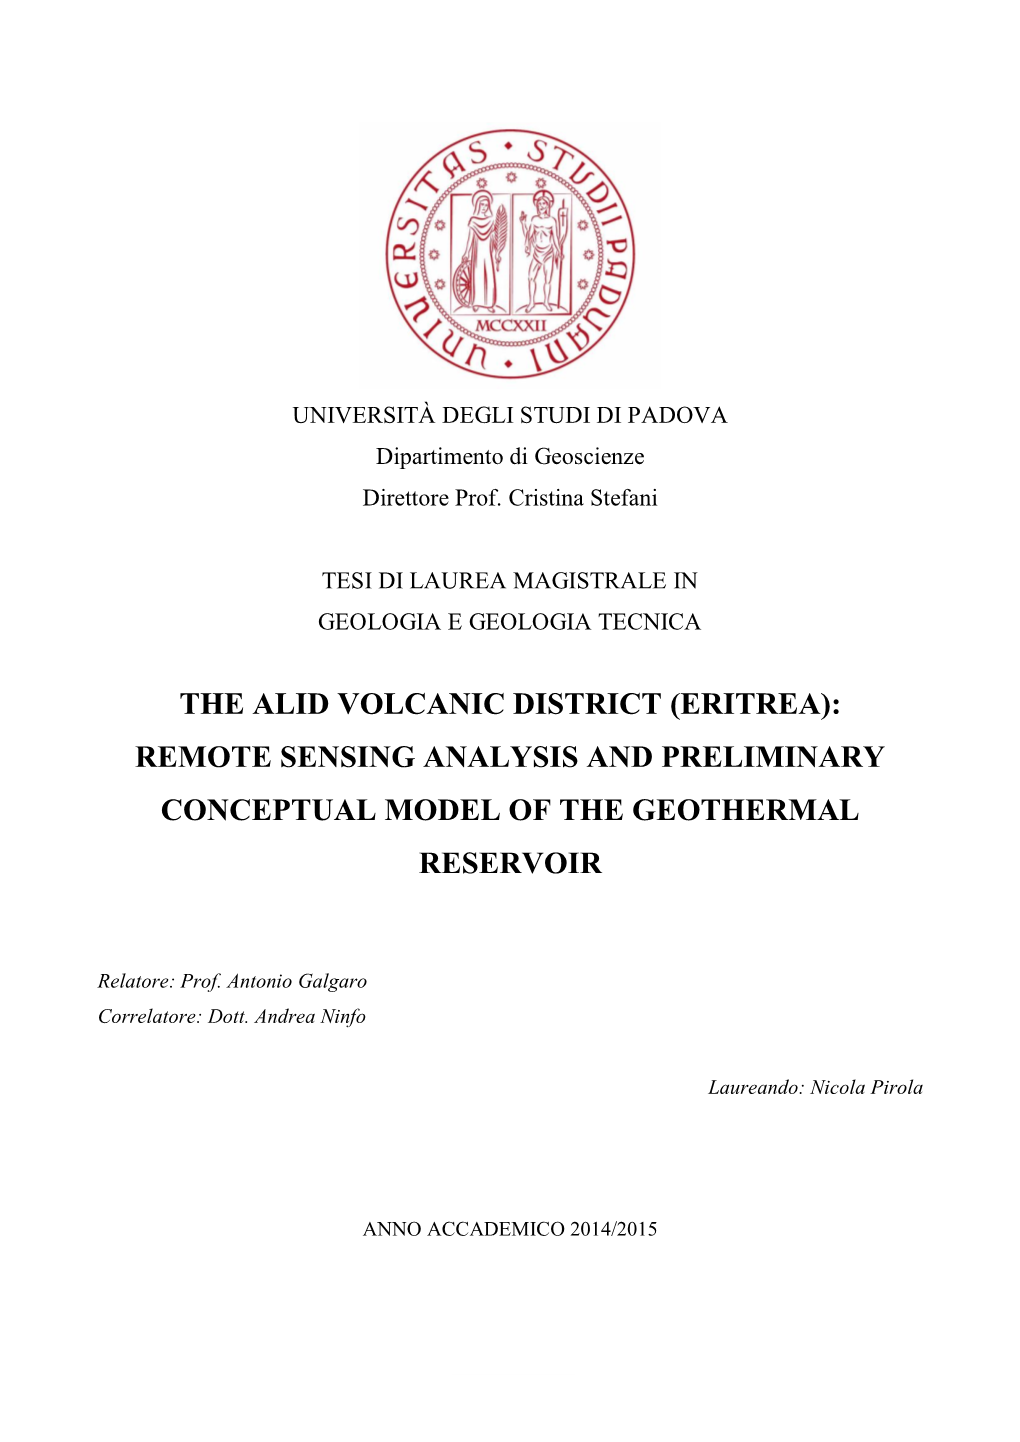 Remote Sensing Analysis and Preliminary Conceptual Model of the Geothermal Reservoir